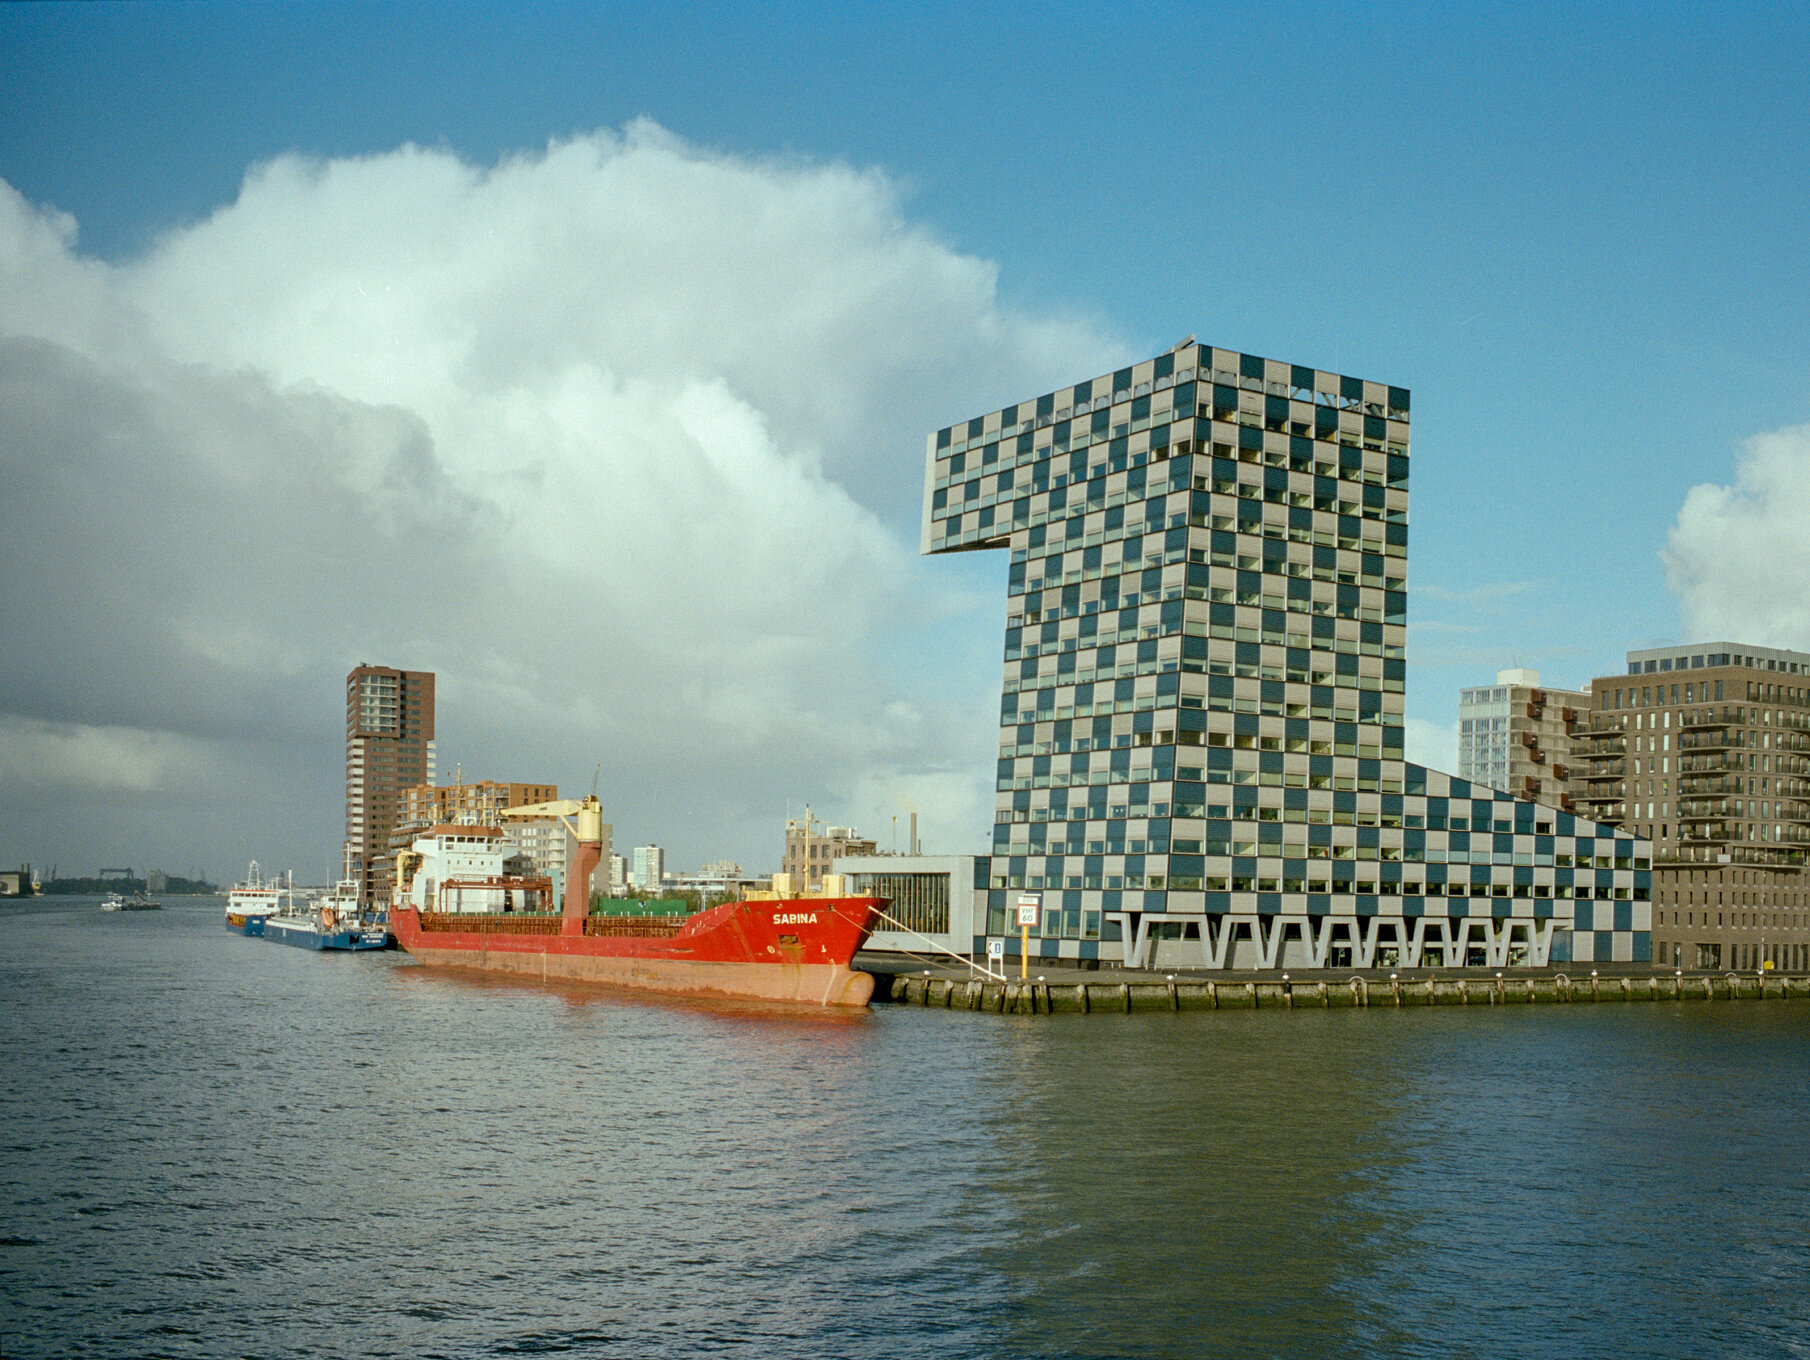   The Shipping and Transport College, Rotterdam, 2010  